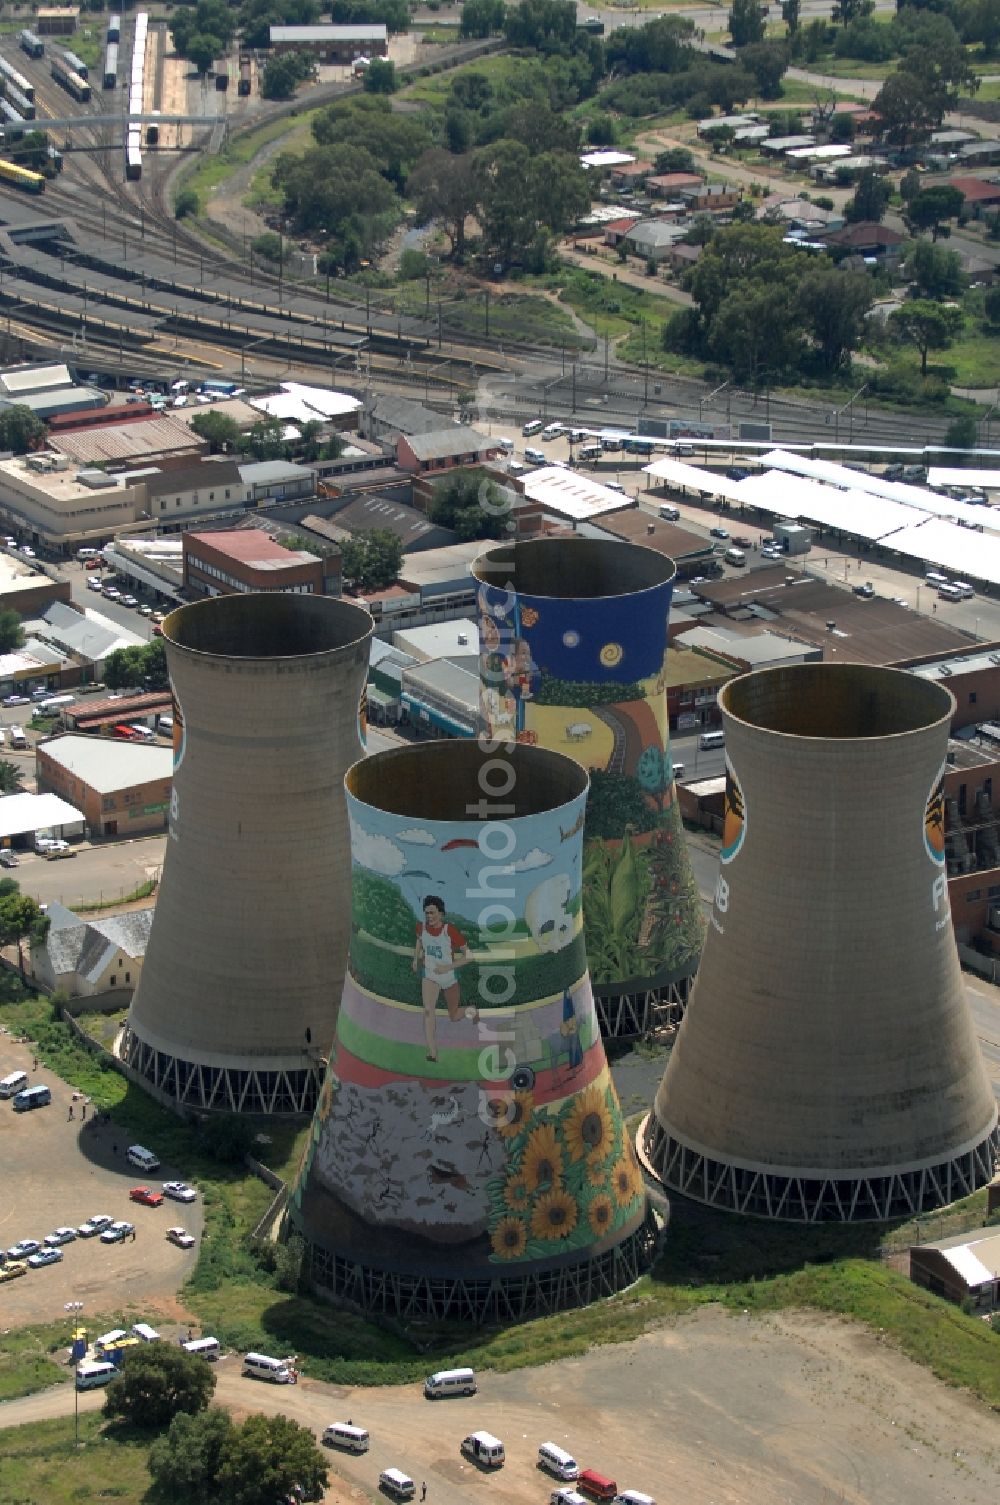 Bloemfontein from the bird's eye view: Cooling towers of the power plants and exhaust towers of the thermal power station on Rhodes Ave in Bloemfontein in Free State, South Africa